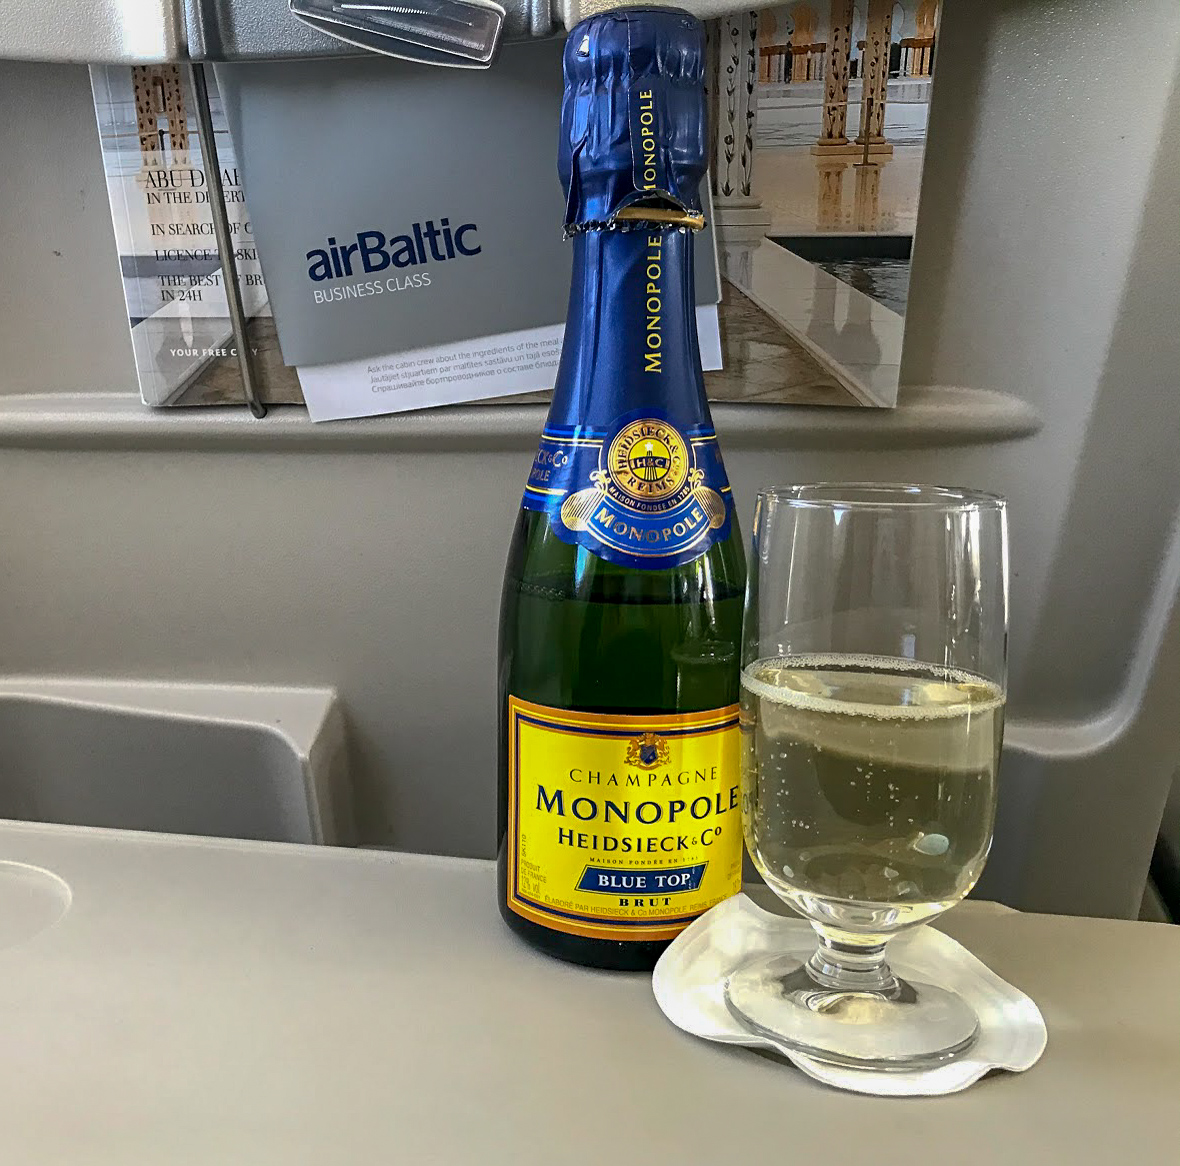 airBaltic A220-300 business class Monopole Brut Champagne bottle and glass